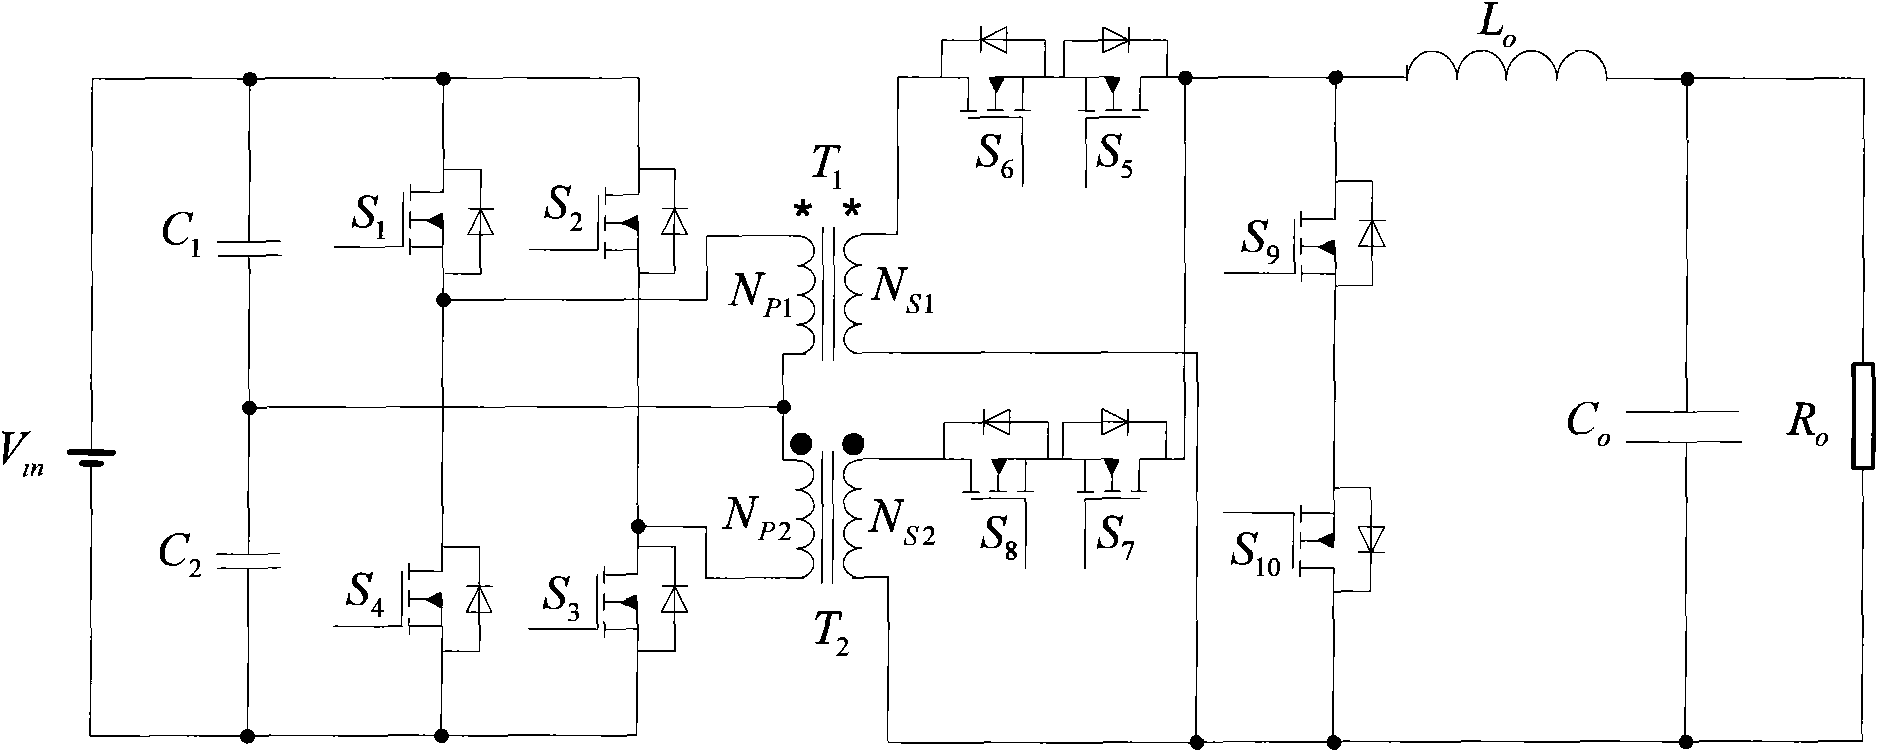 Single-stage forward type high-frequency linked inverter